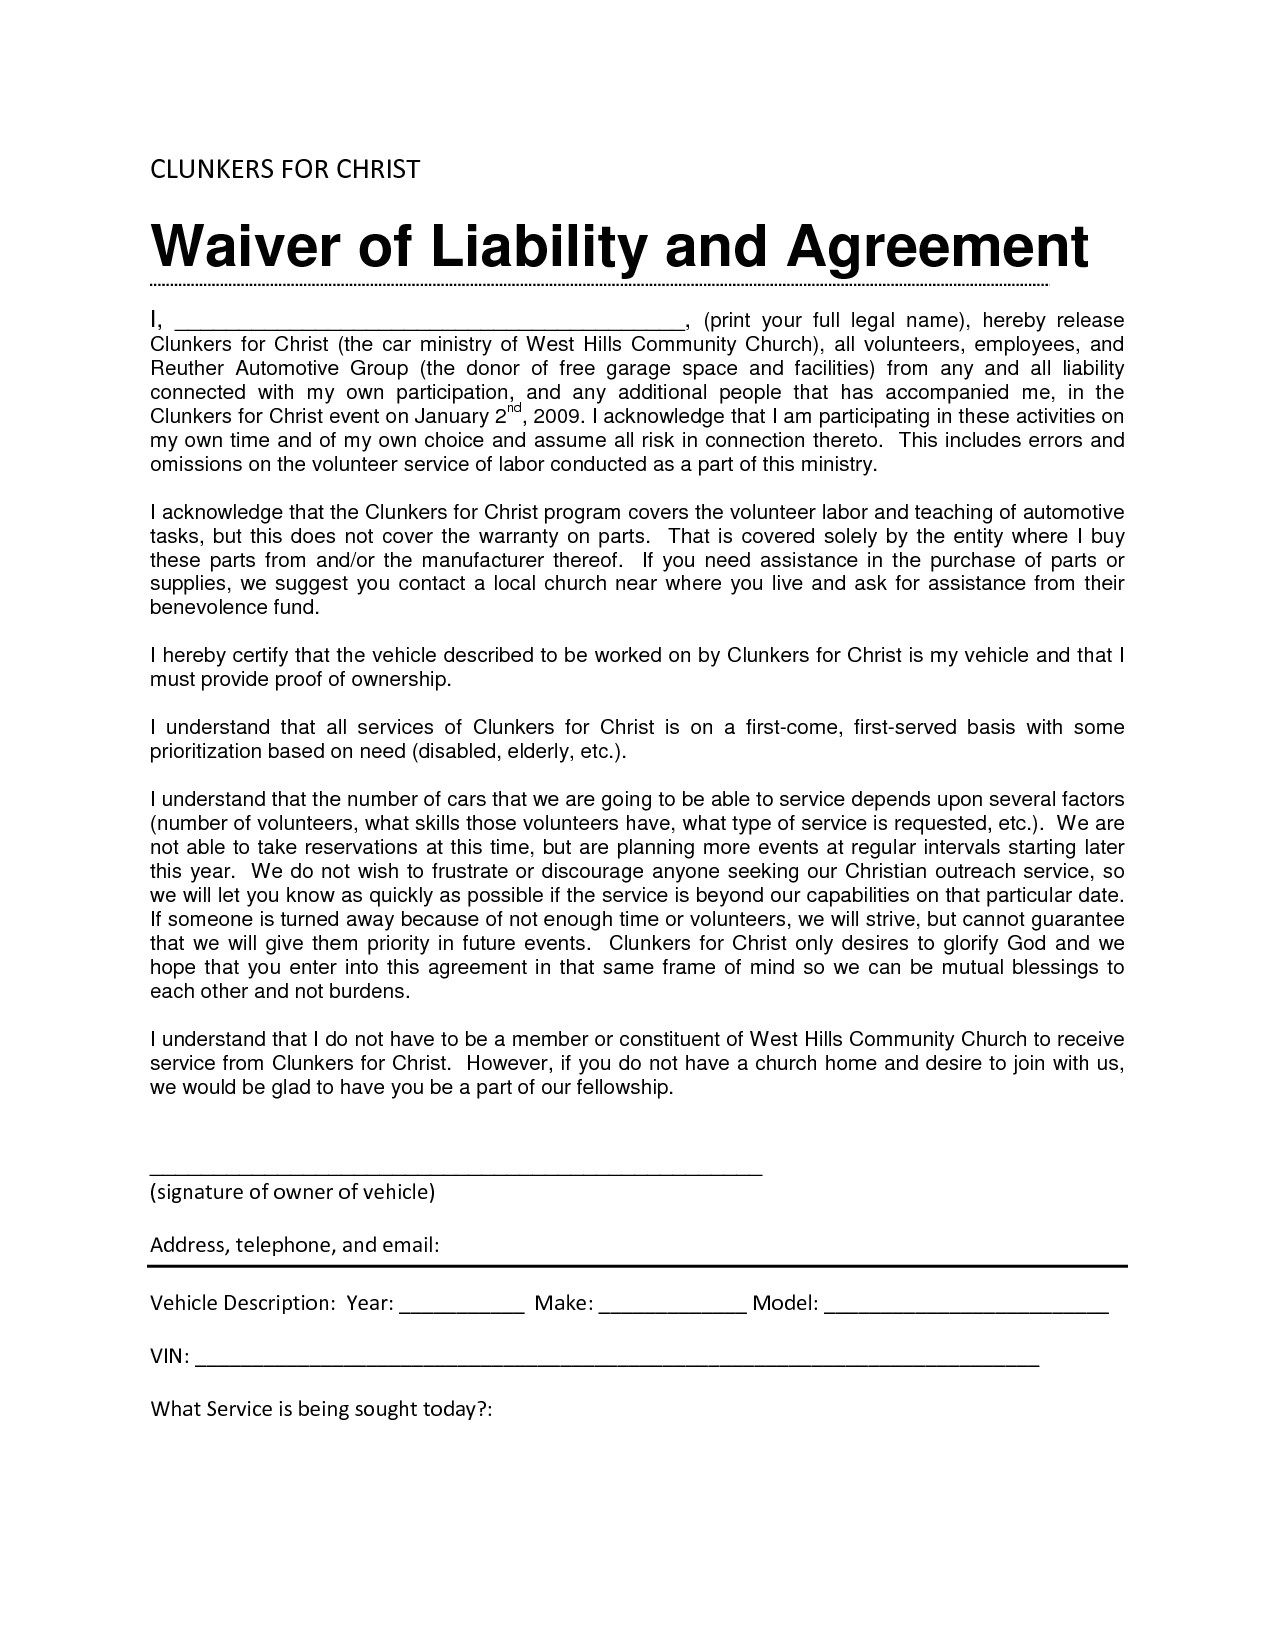 Waiver Of Responsibility Template Liability Waiver Sample Bamboodownunder Com